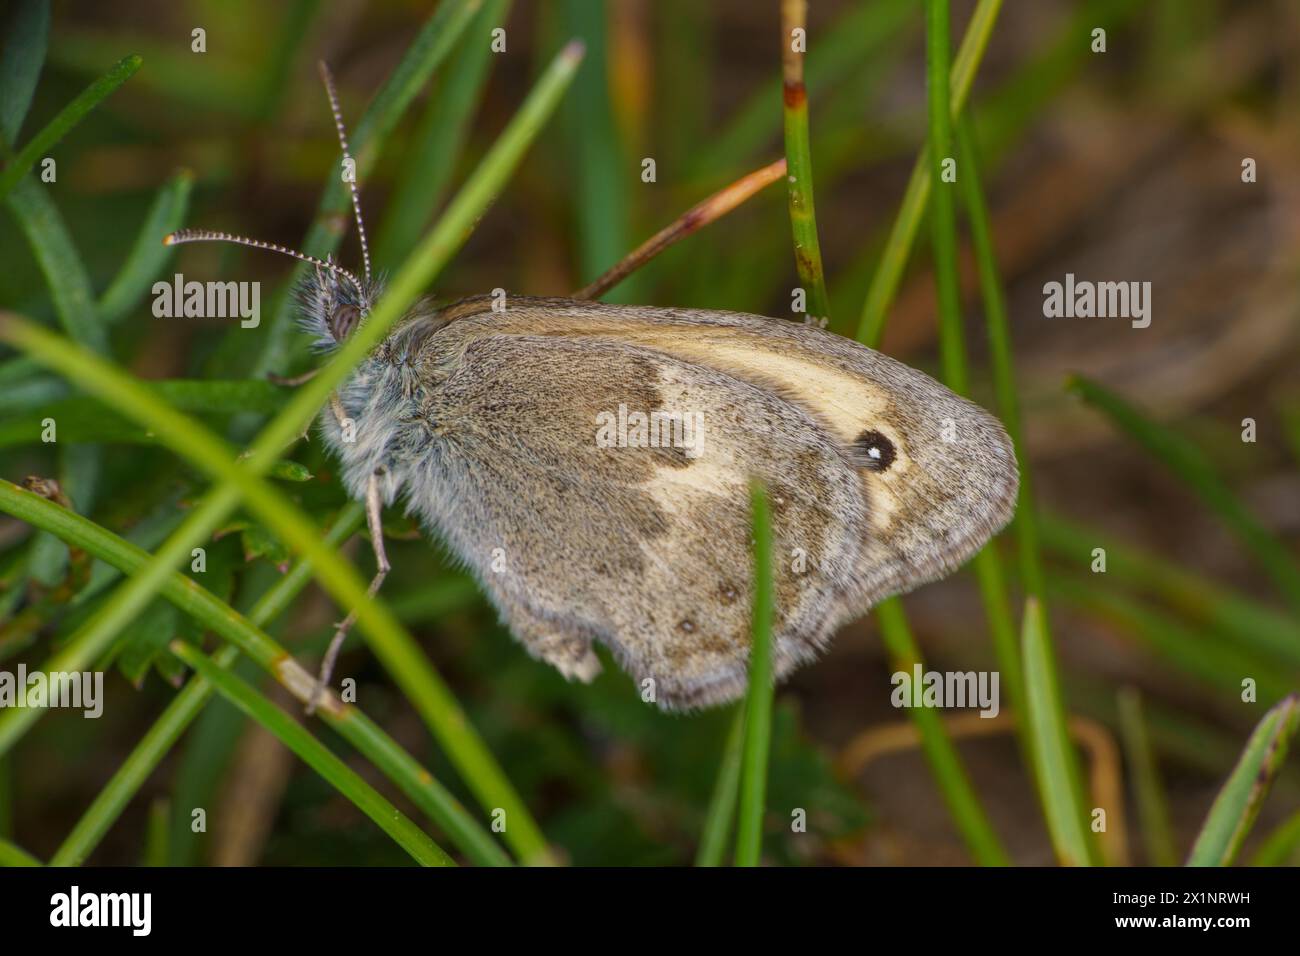 Coenonympha pamphilus Family Nymphalidae Genus Coenonympha Small heath butterfly wild nature insect wallpaper, picture, photography Stock Photo